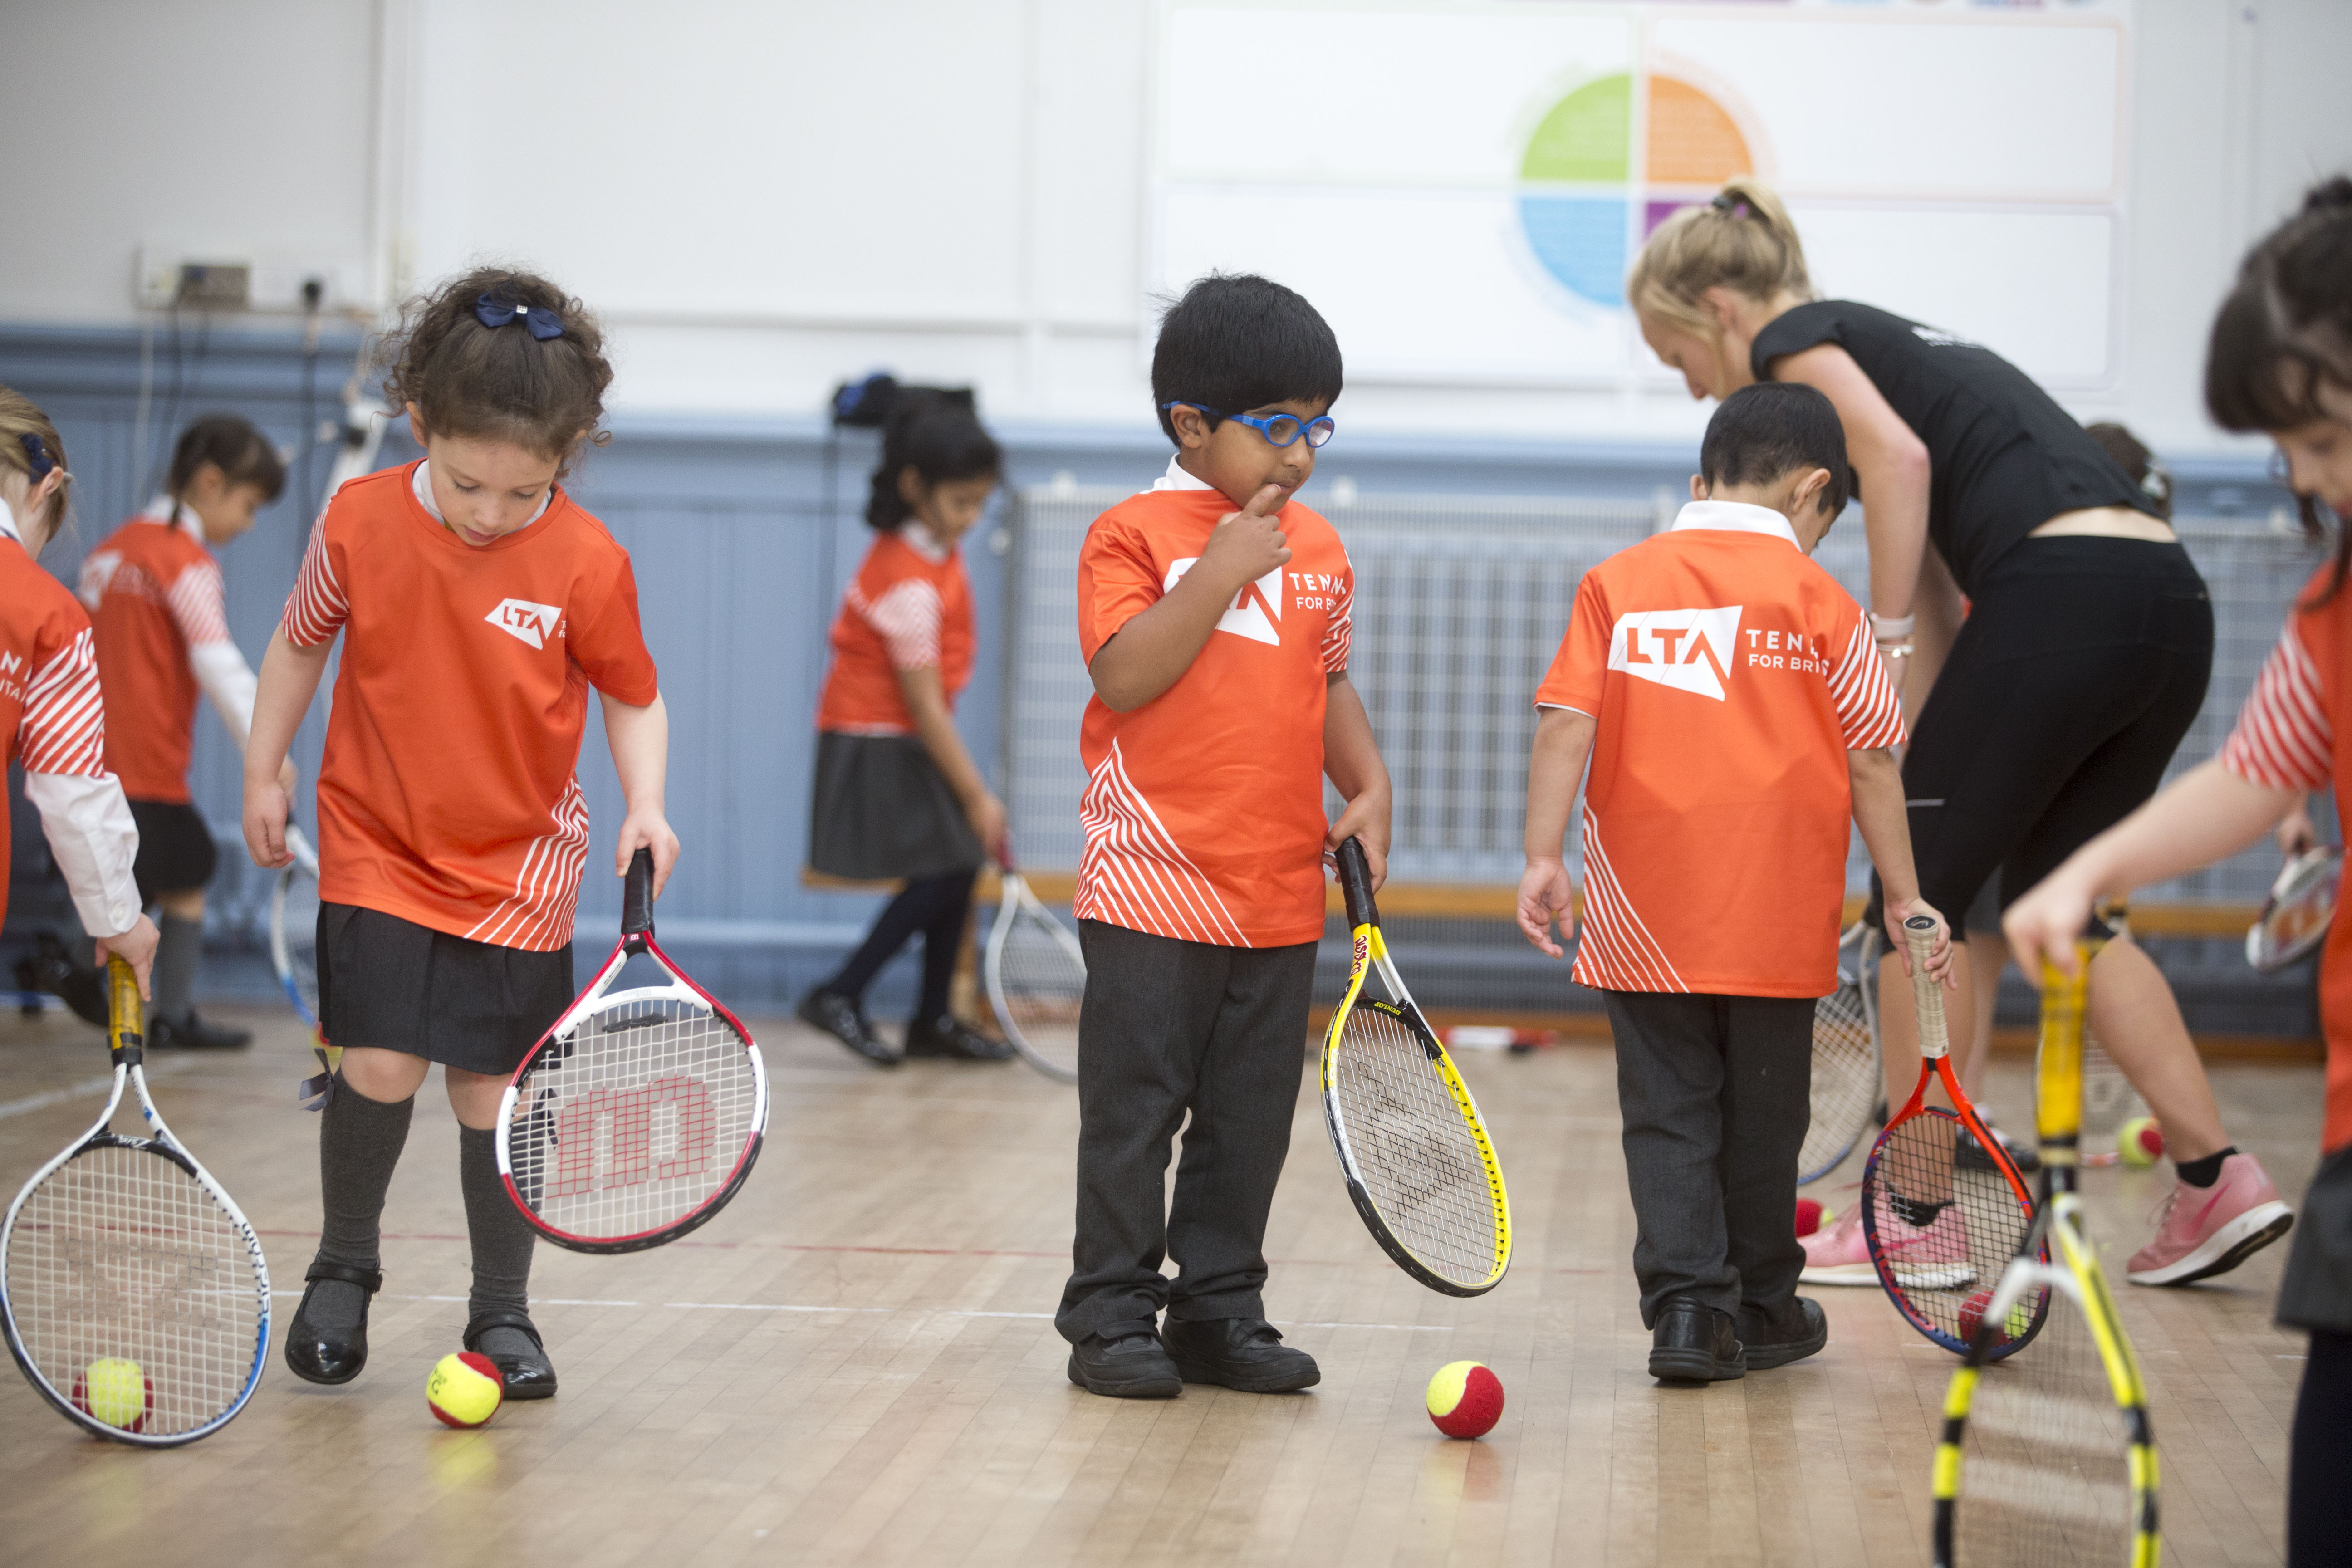 Almost 100,000 children have taken part in Tennis for Kids in the UK